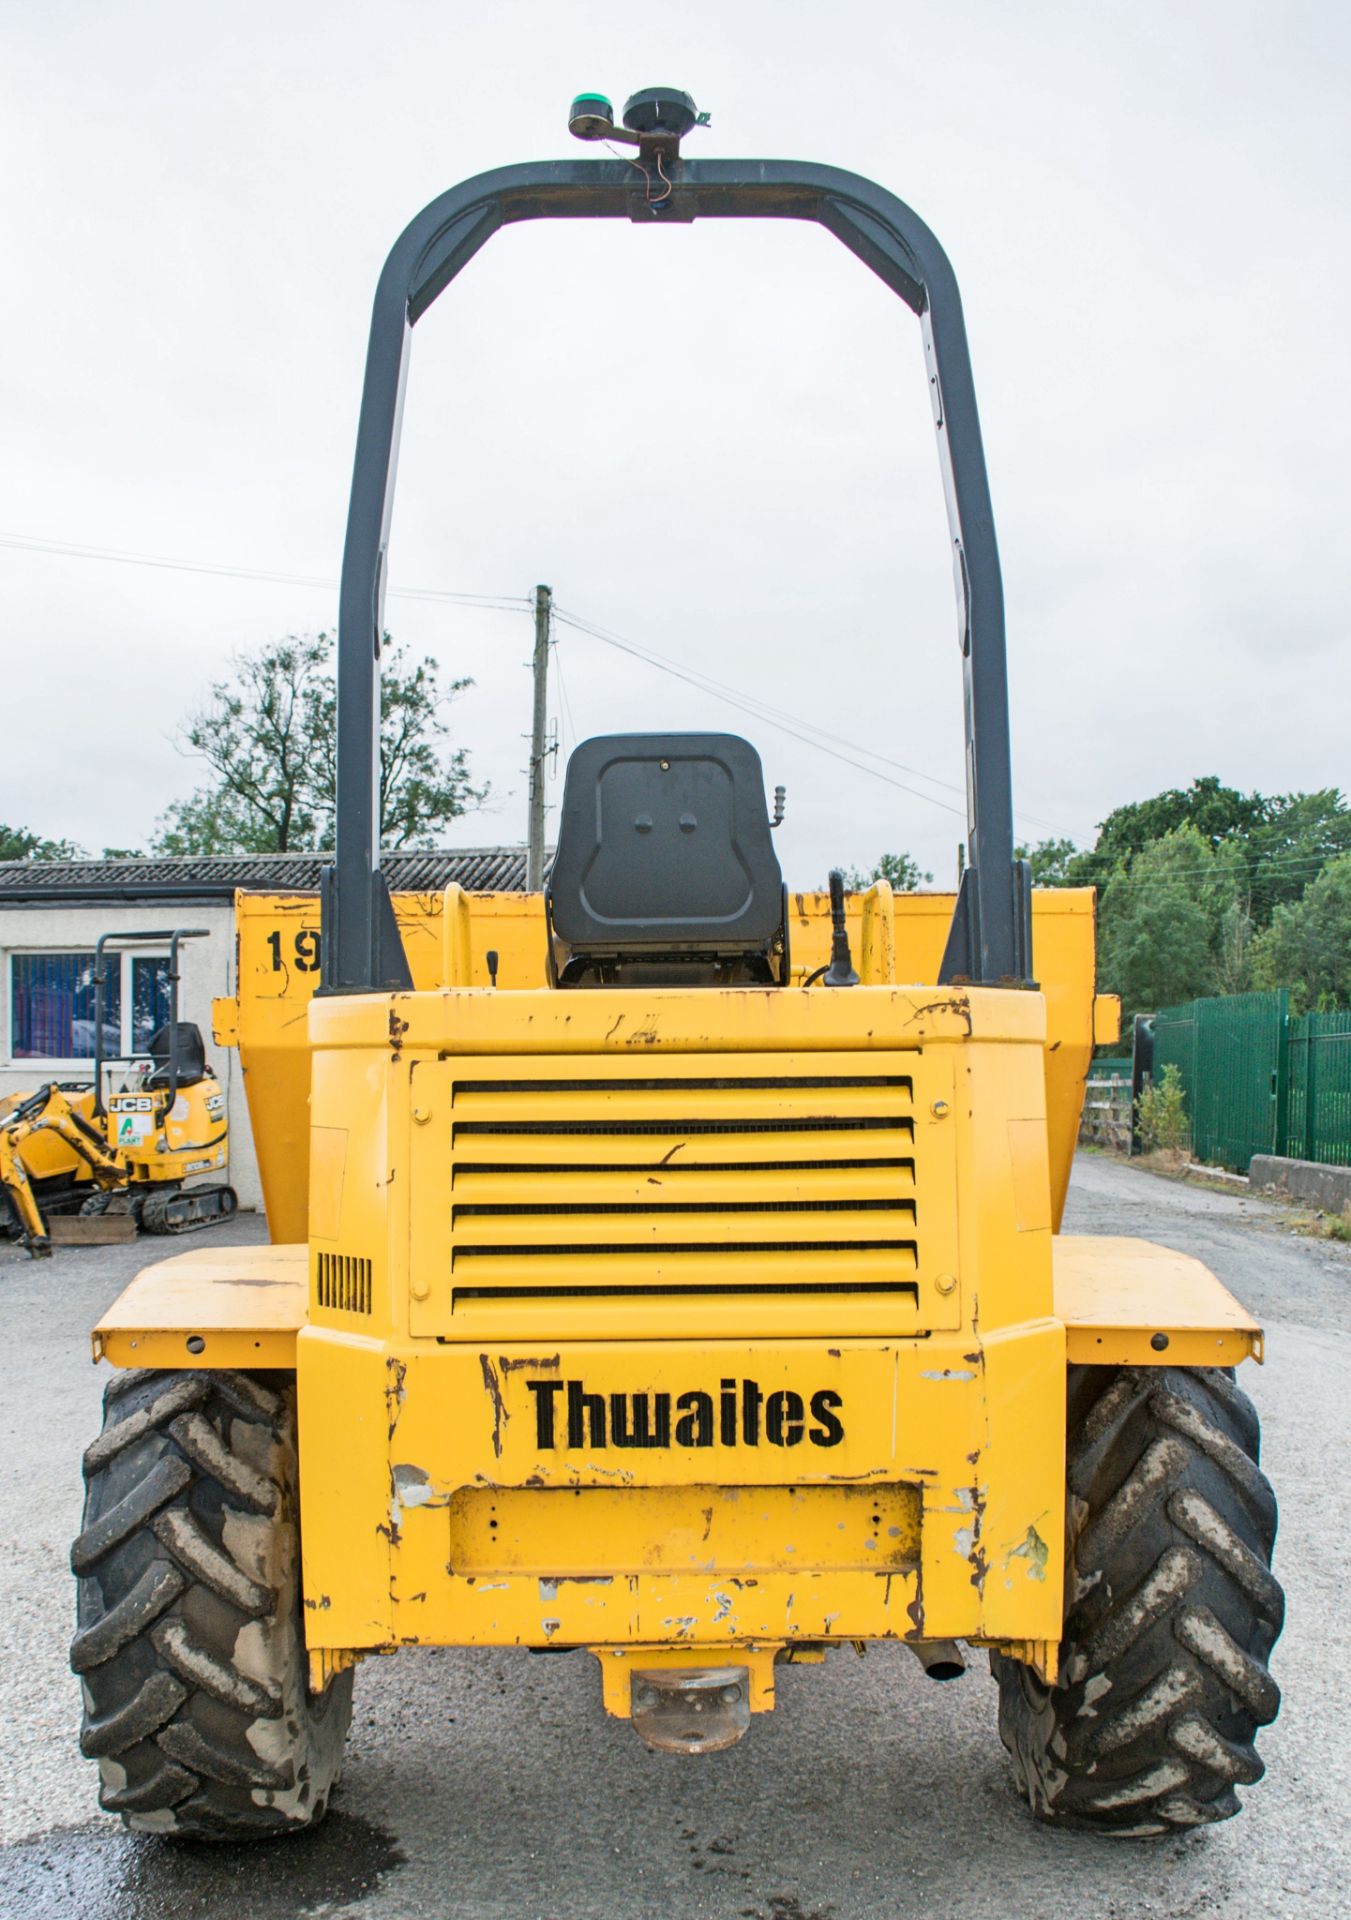 Thwaites 6 tonne straight skip dumper Year: 2005 S/N: 7A7275 Recorded Hours: 3971 1905 - Image 6 of 14